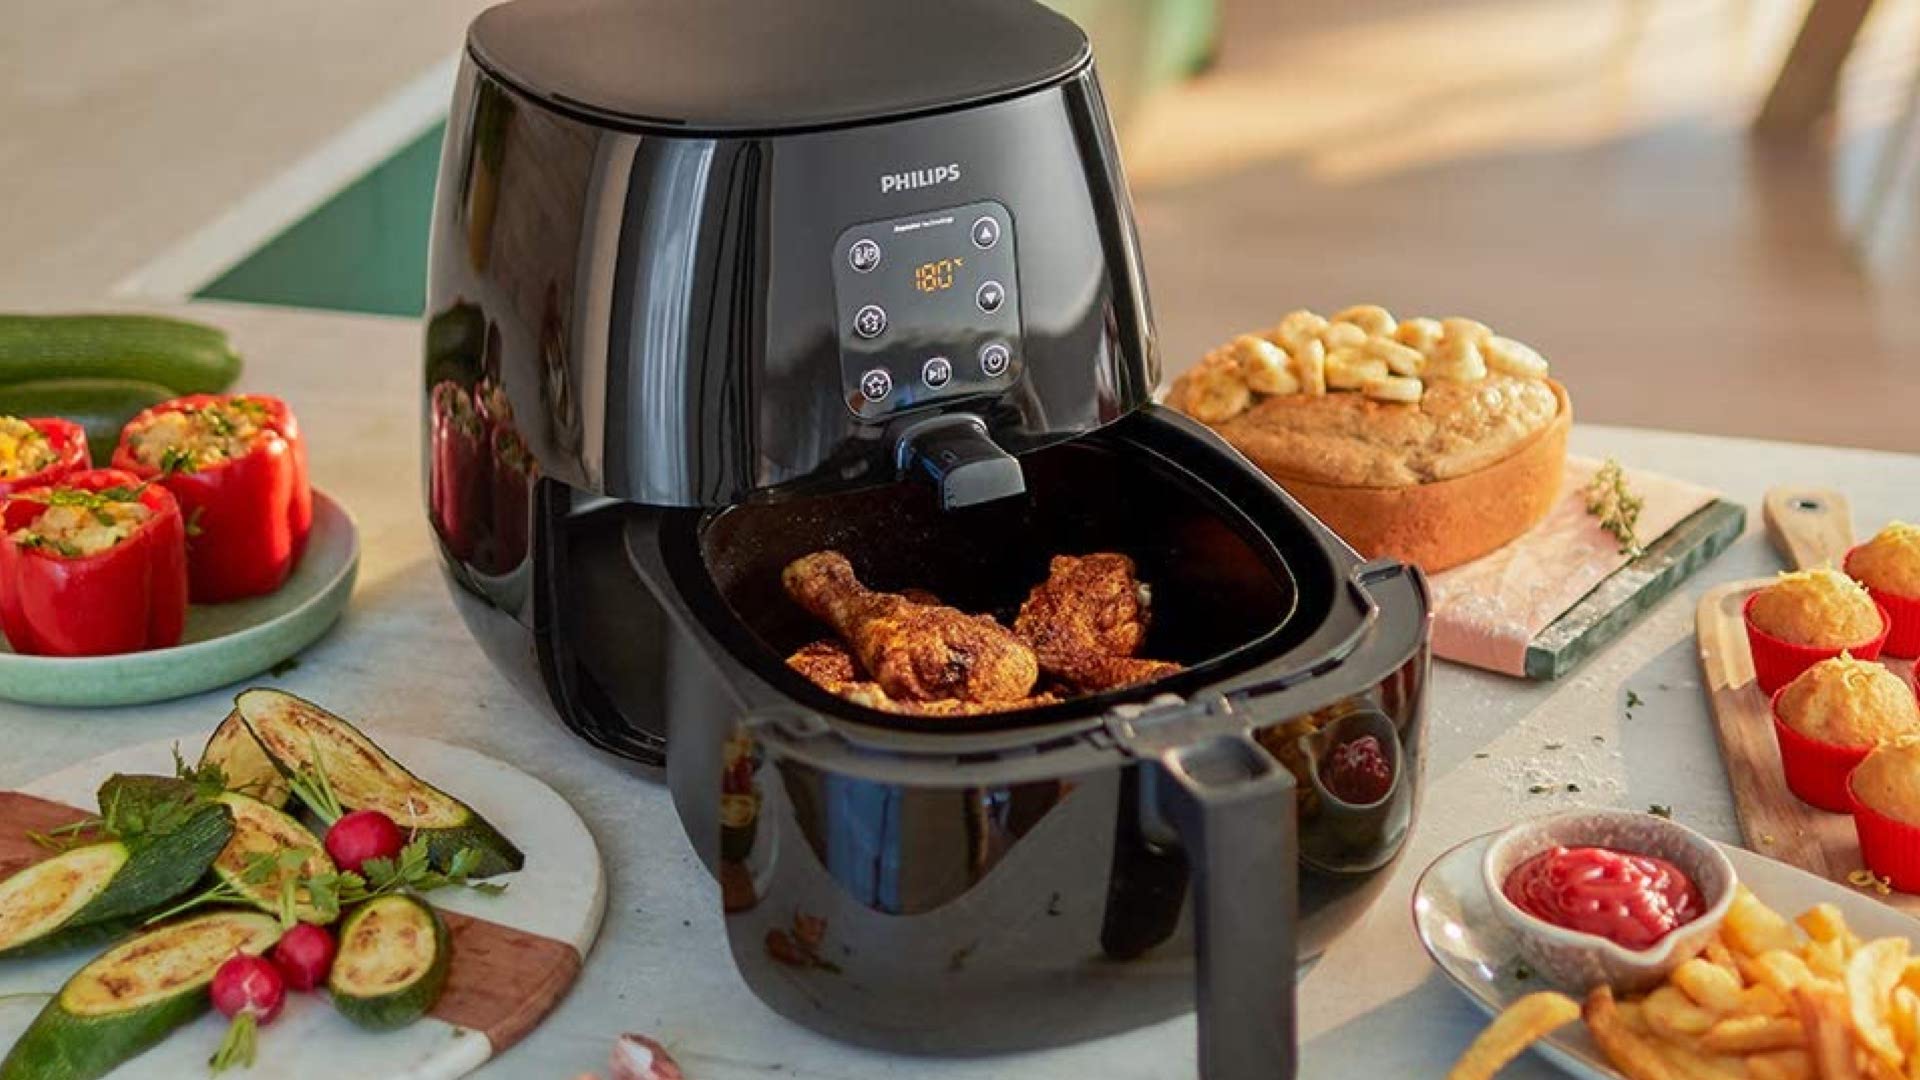 The best foods to cook in an air fryer